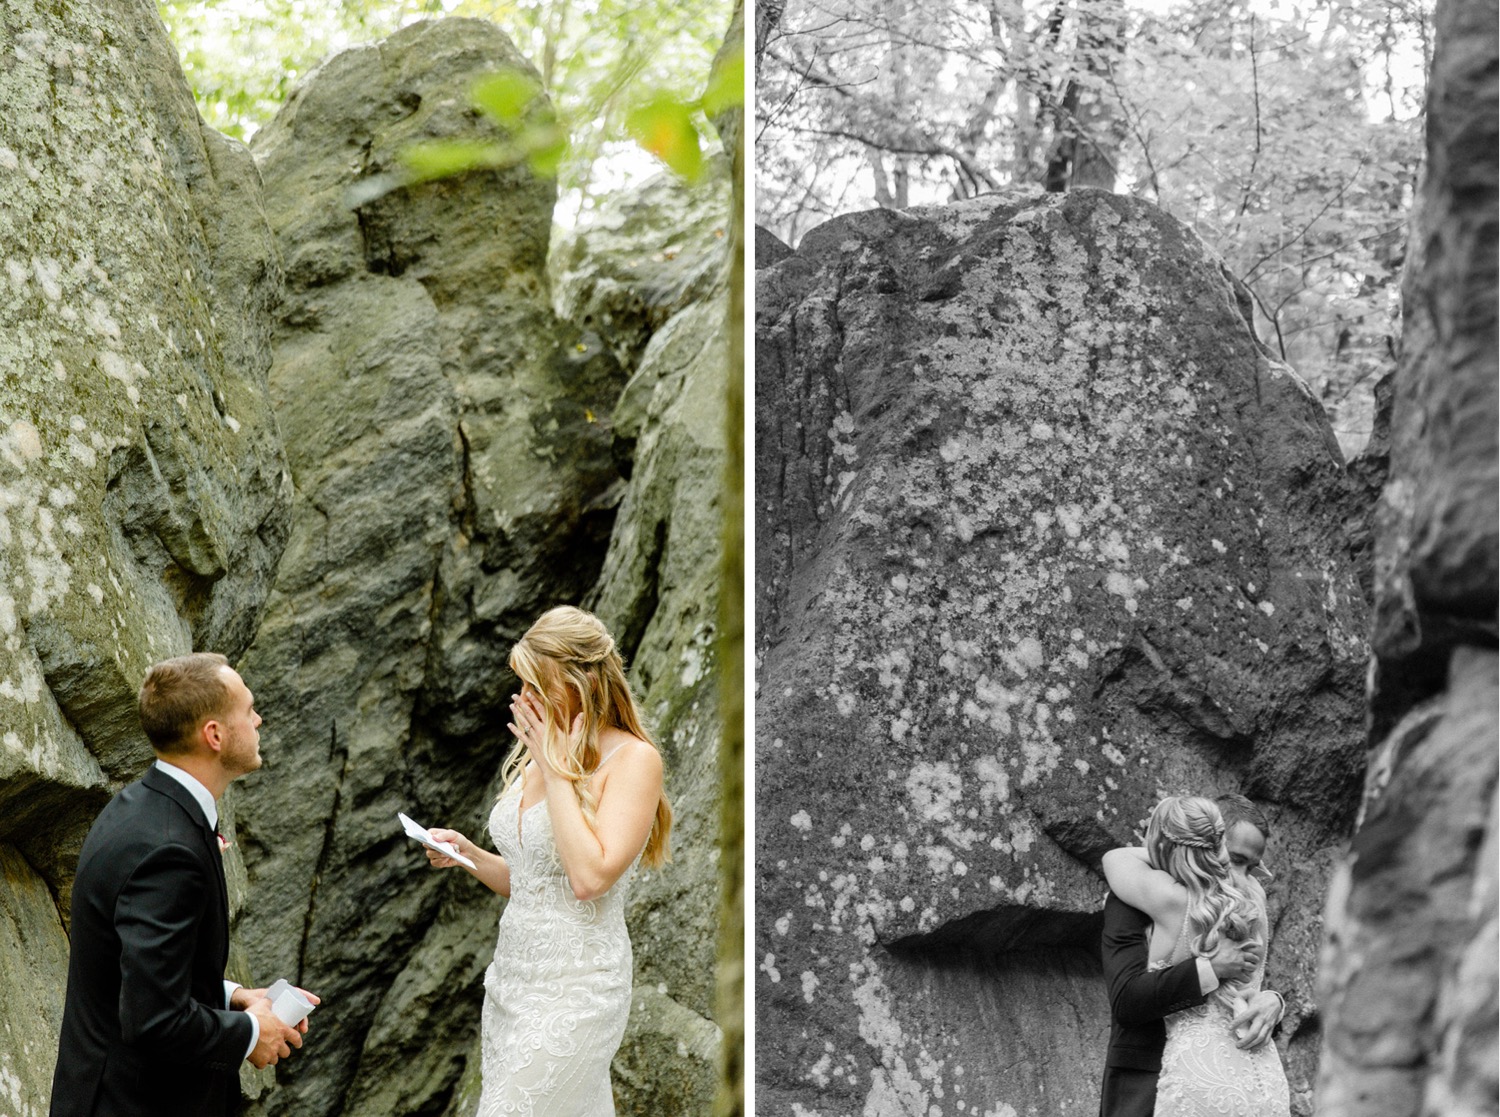 bride crying during private vows in forest, couple hugging